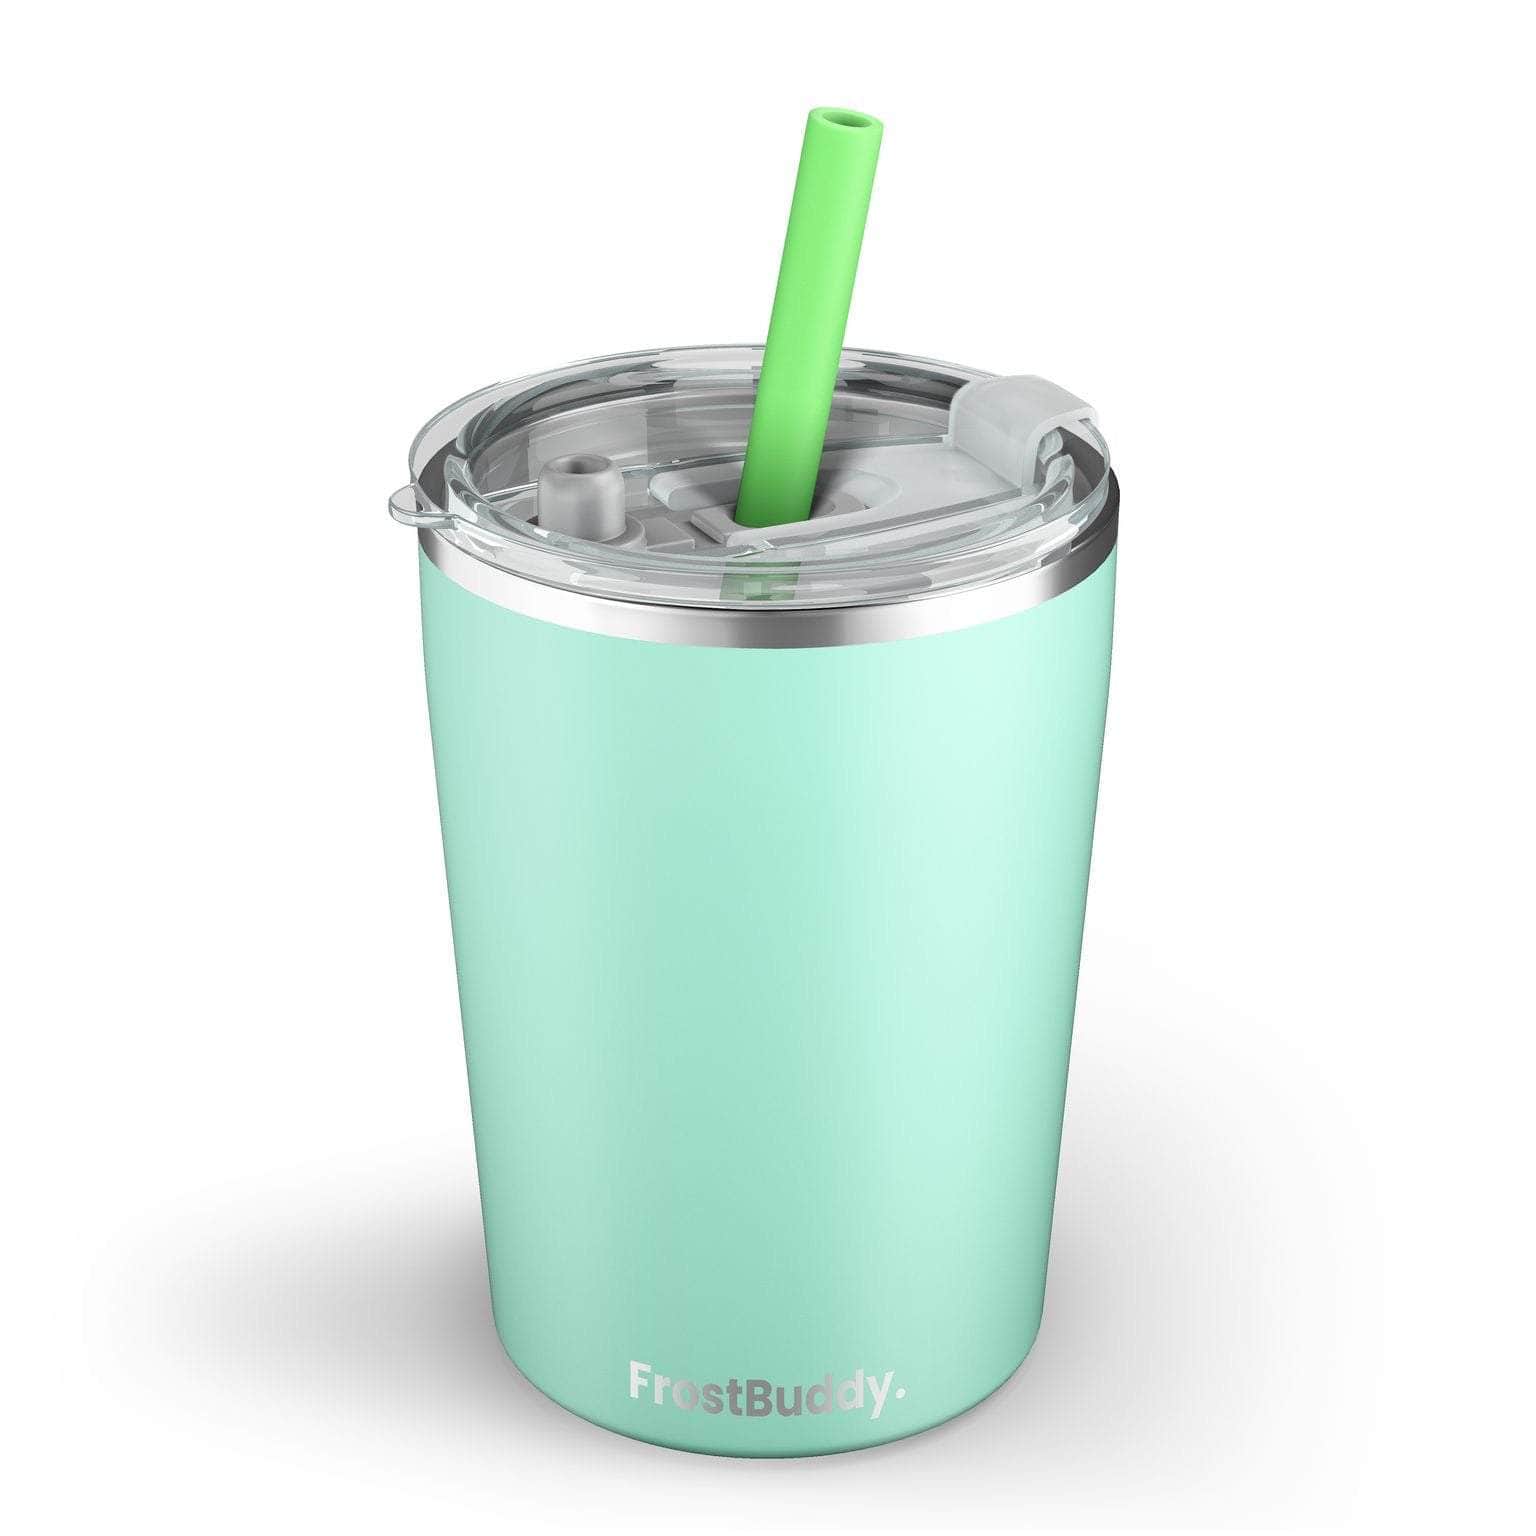 Adult Spillproof Drinking Cup with Built-In-Straw - pack of 3